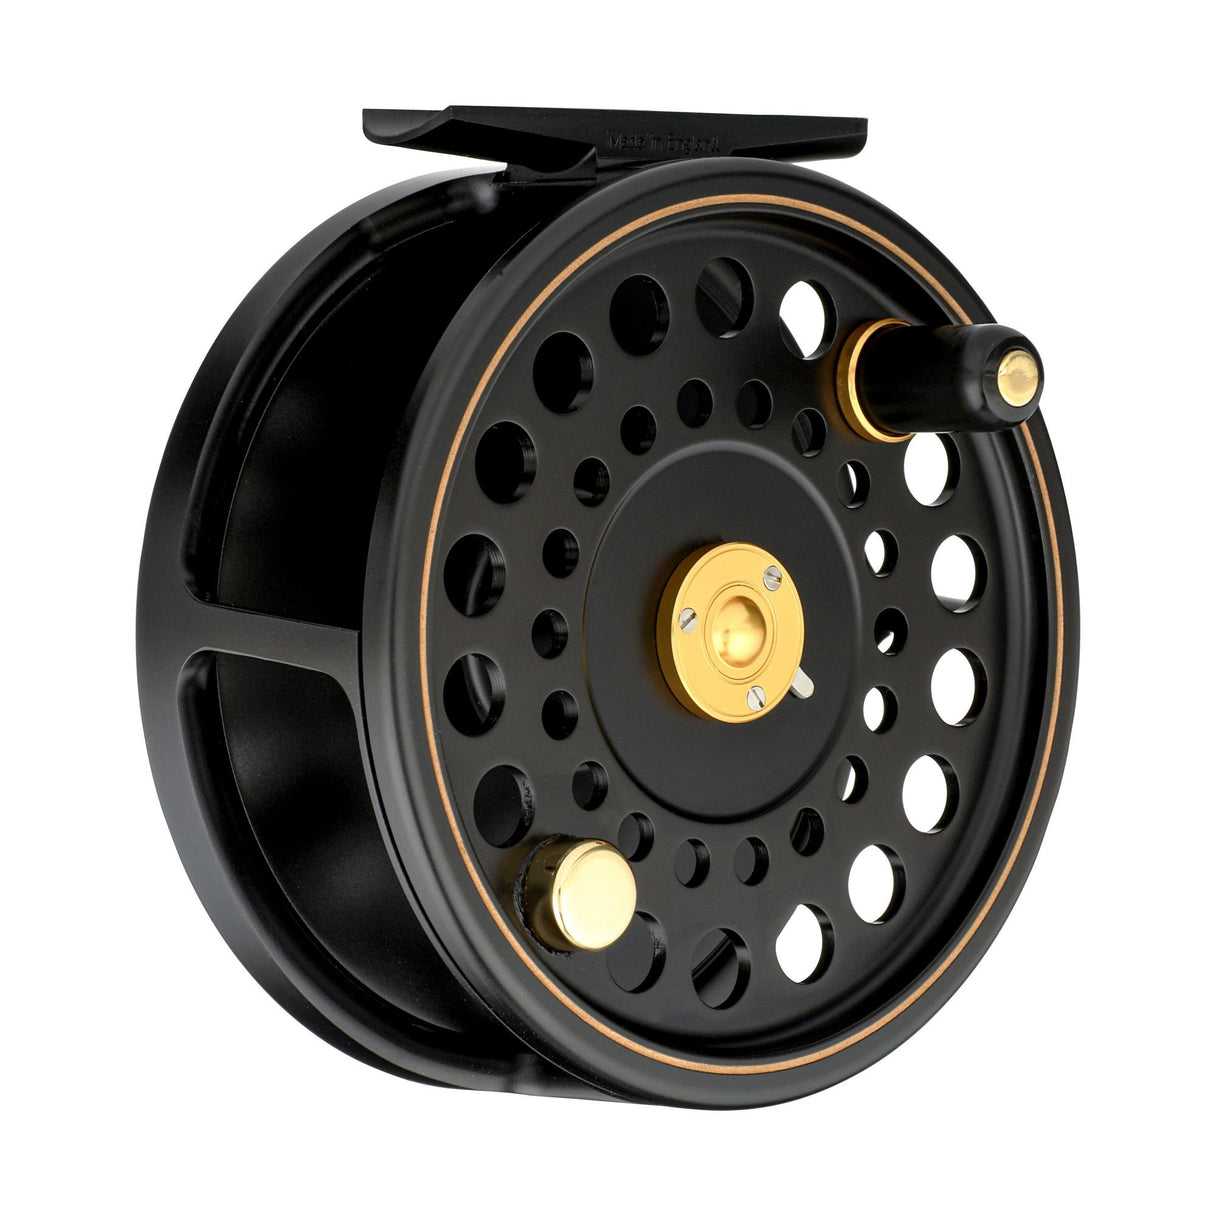 MADE IN ENGLAND – HARDY “GOLDEN PRINCE” #7/8 TROUT FLY REEL +